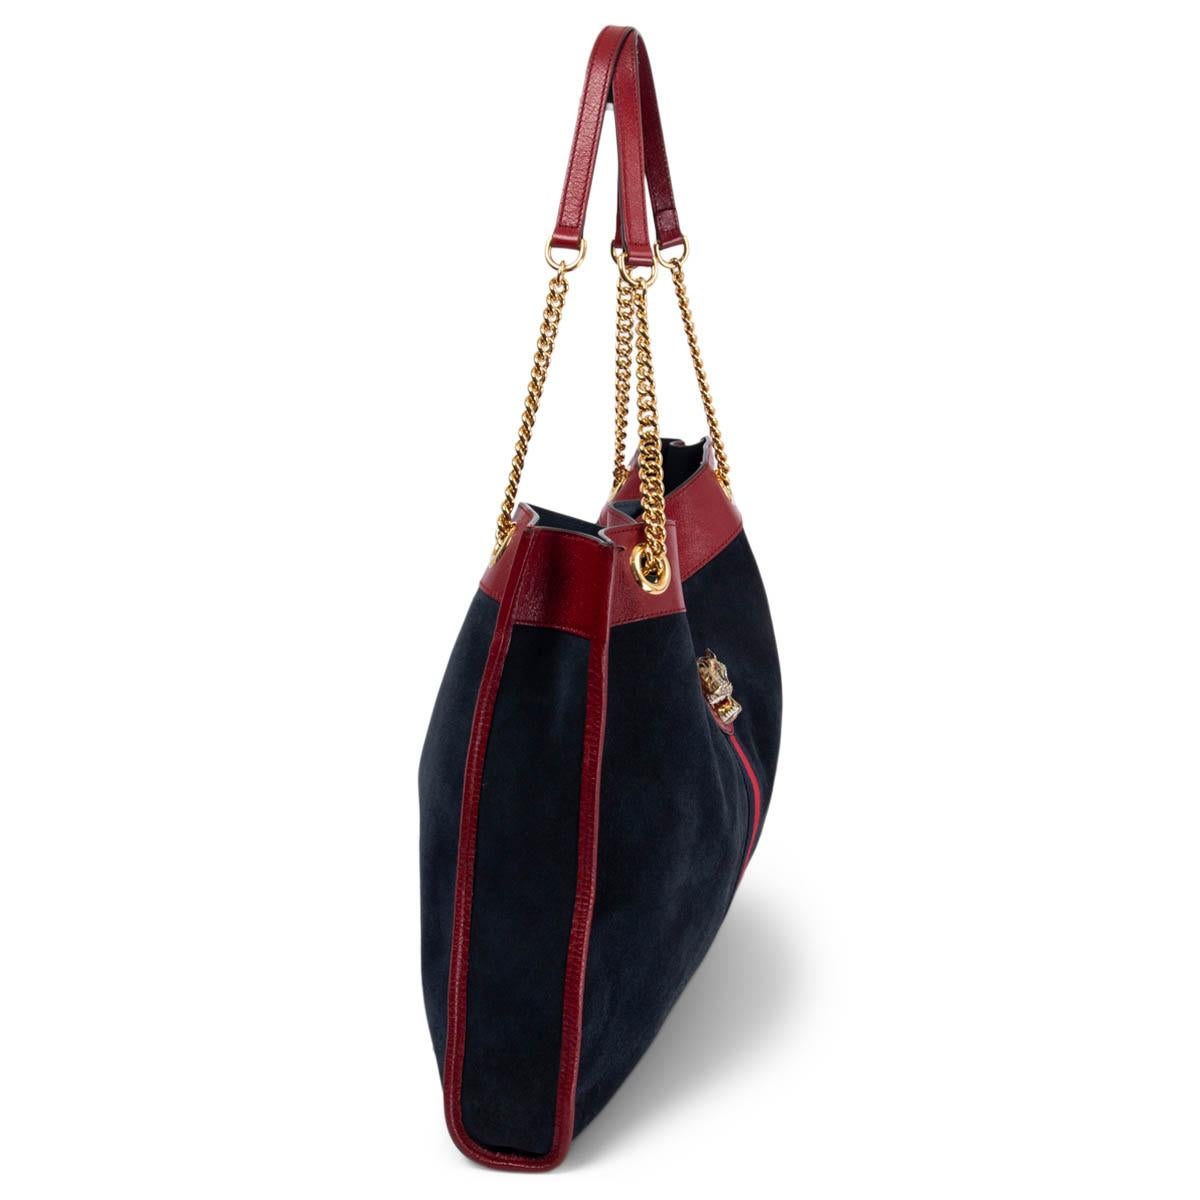 100% authentic Gucci Rajah Large tote bag in navy suede trimmed with cerise glazed leather and the House Web in red and navy. The line is defined by the tiger head finished with colored enamel and sparkling crystals, inspired by a vintage piece from